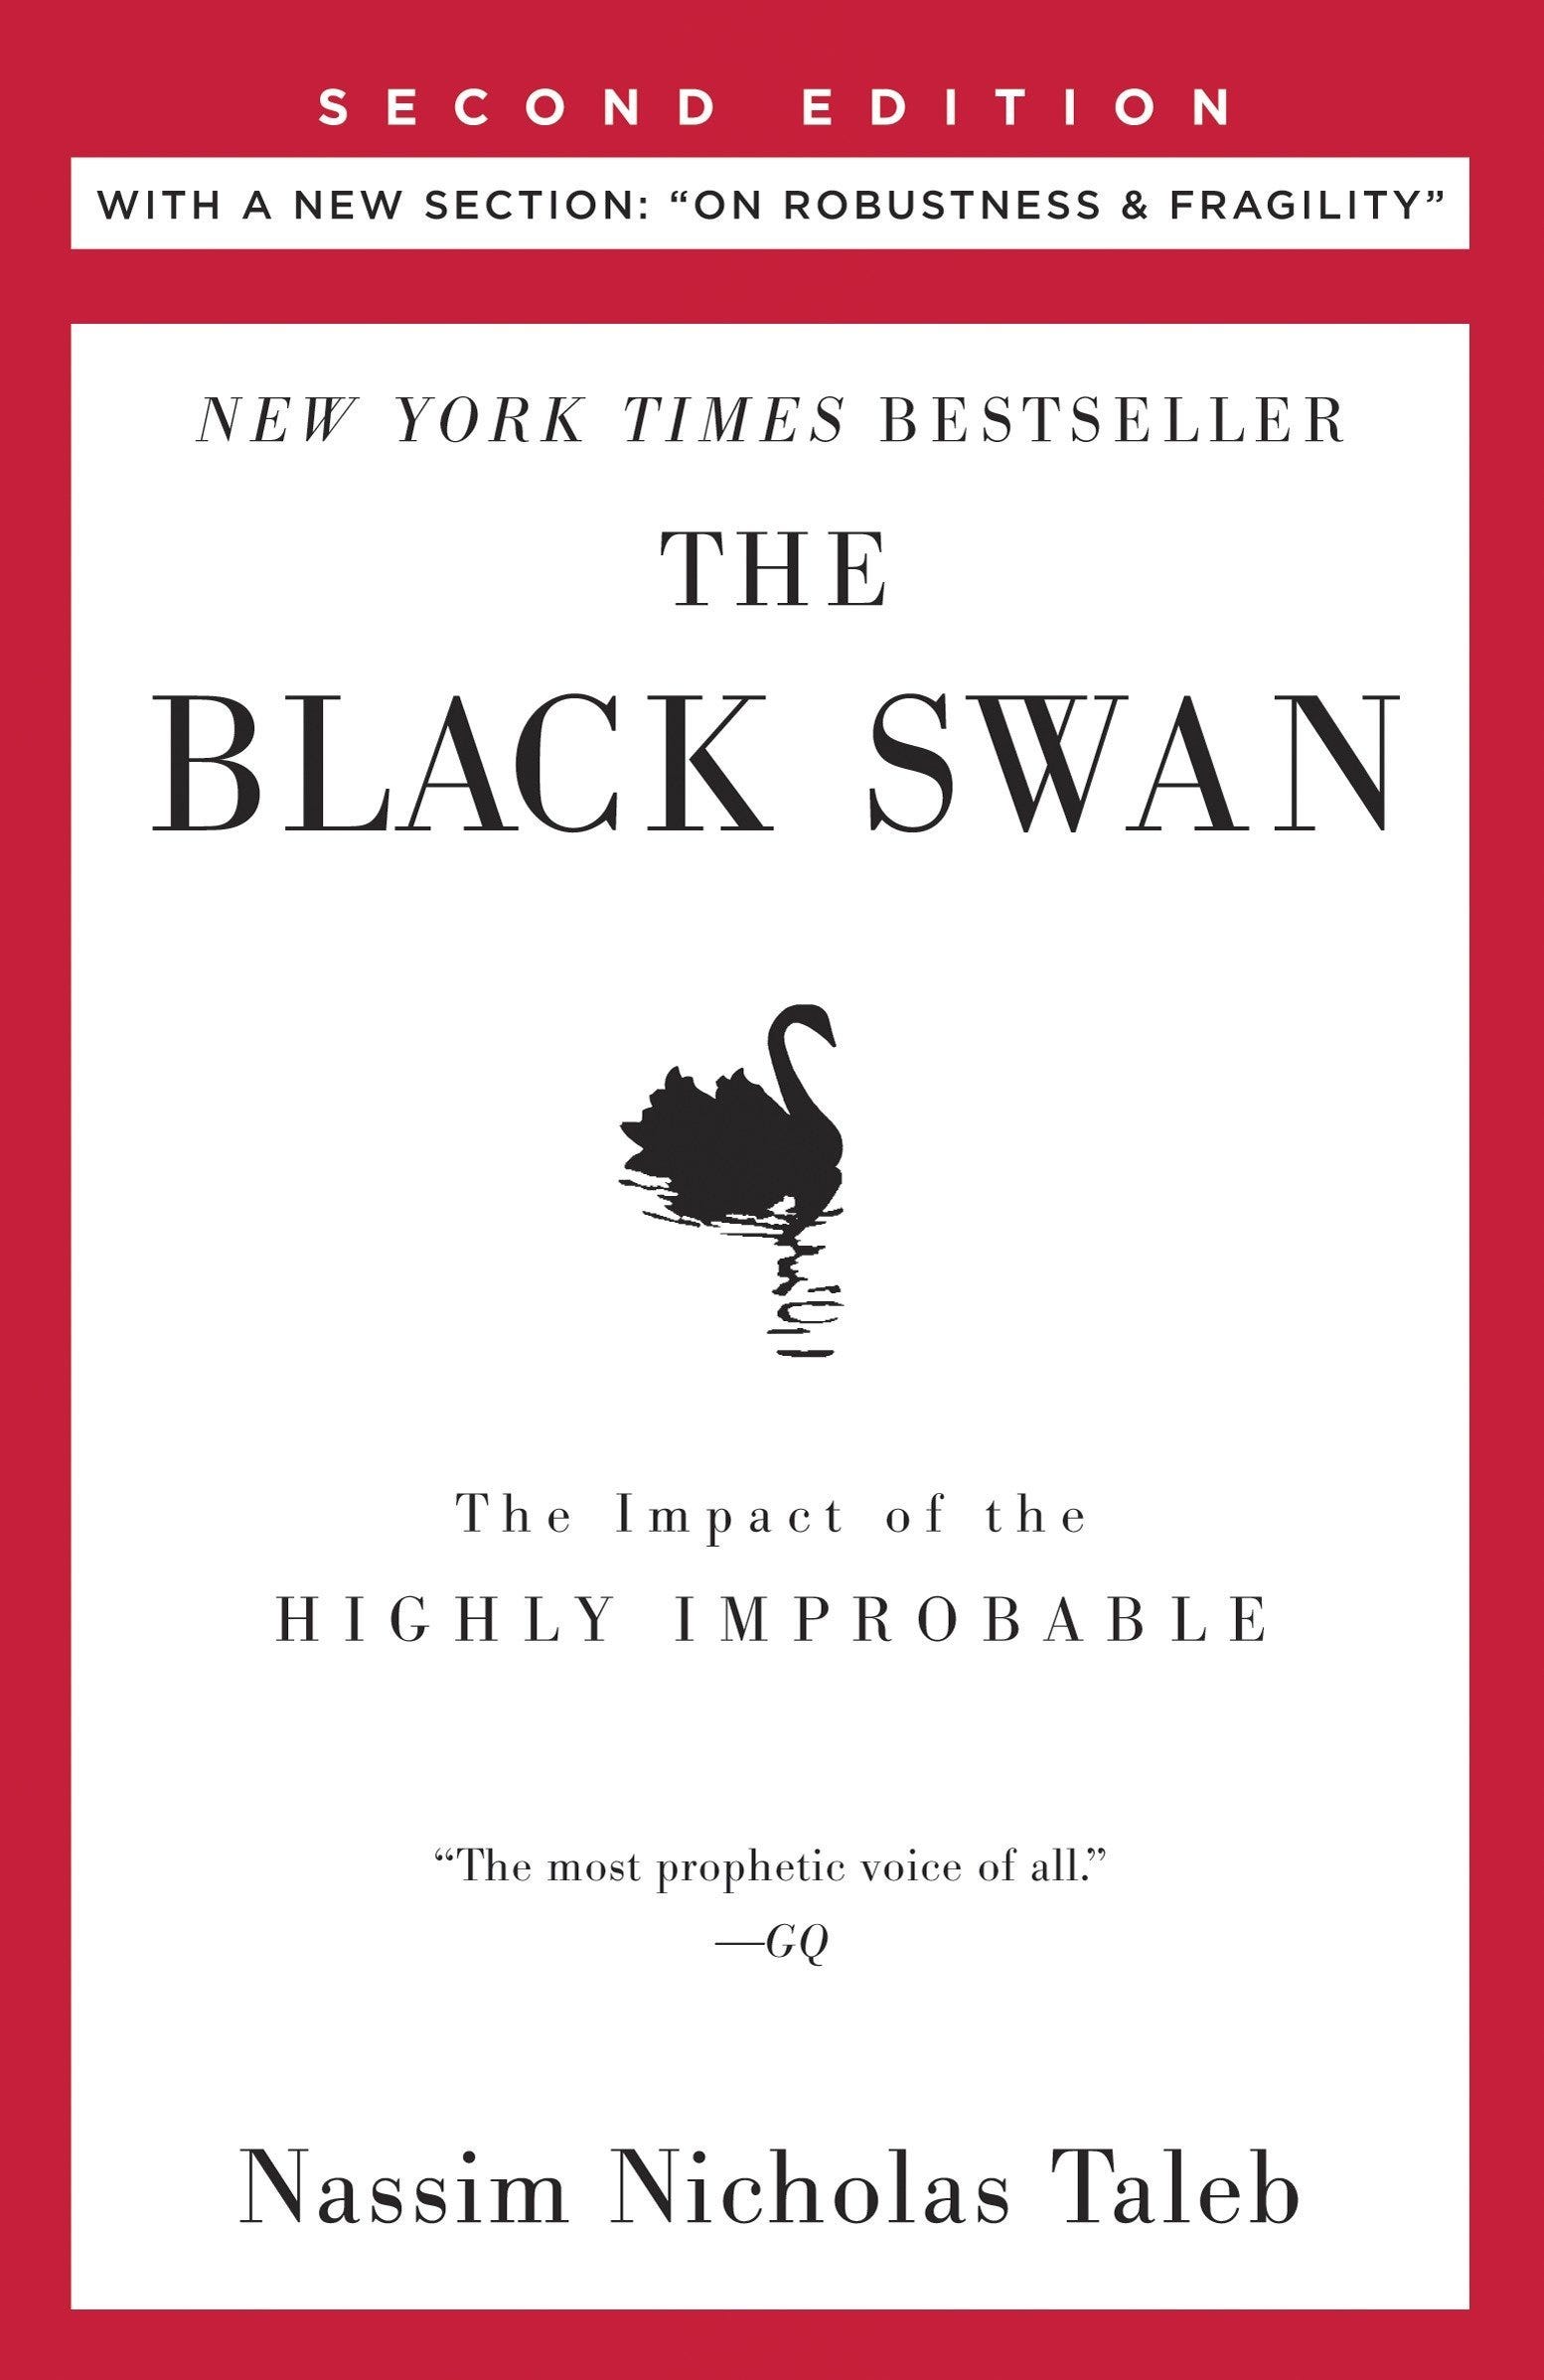 <p>Nassim Nicholas Taleb popularized the term "black swan" with this book, in which he defines such events as highly improbable, unpredictable, and impactful. </p>